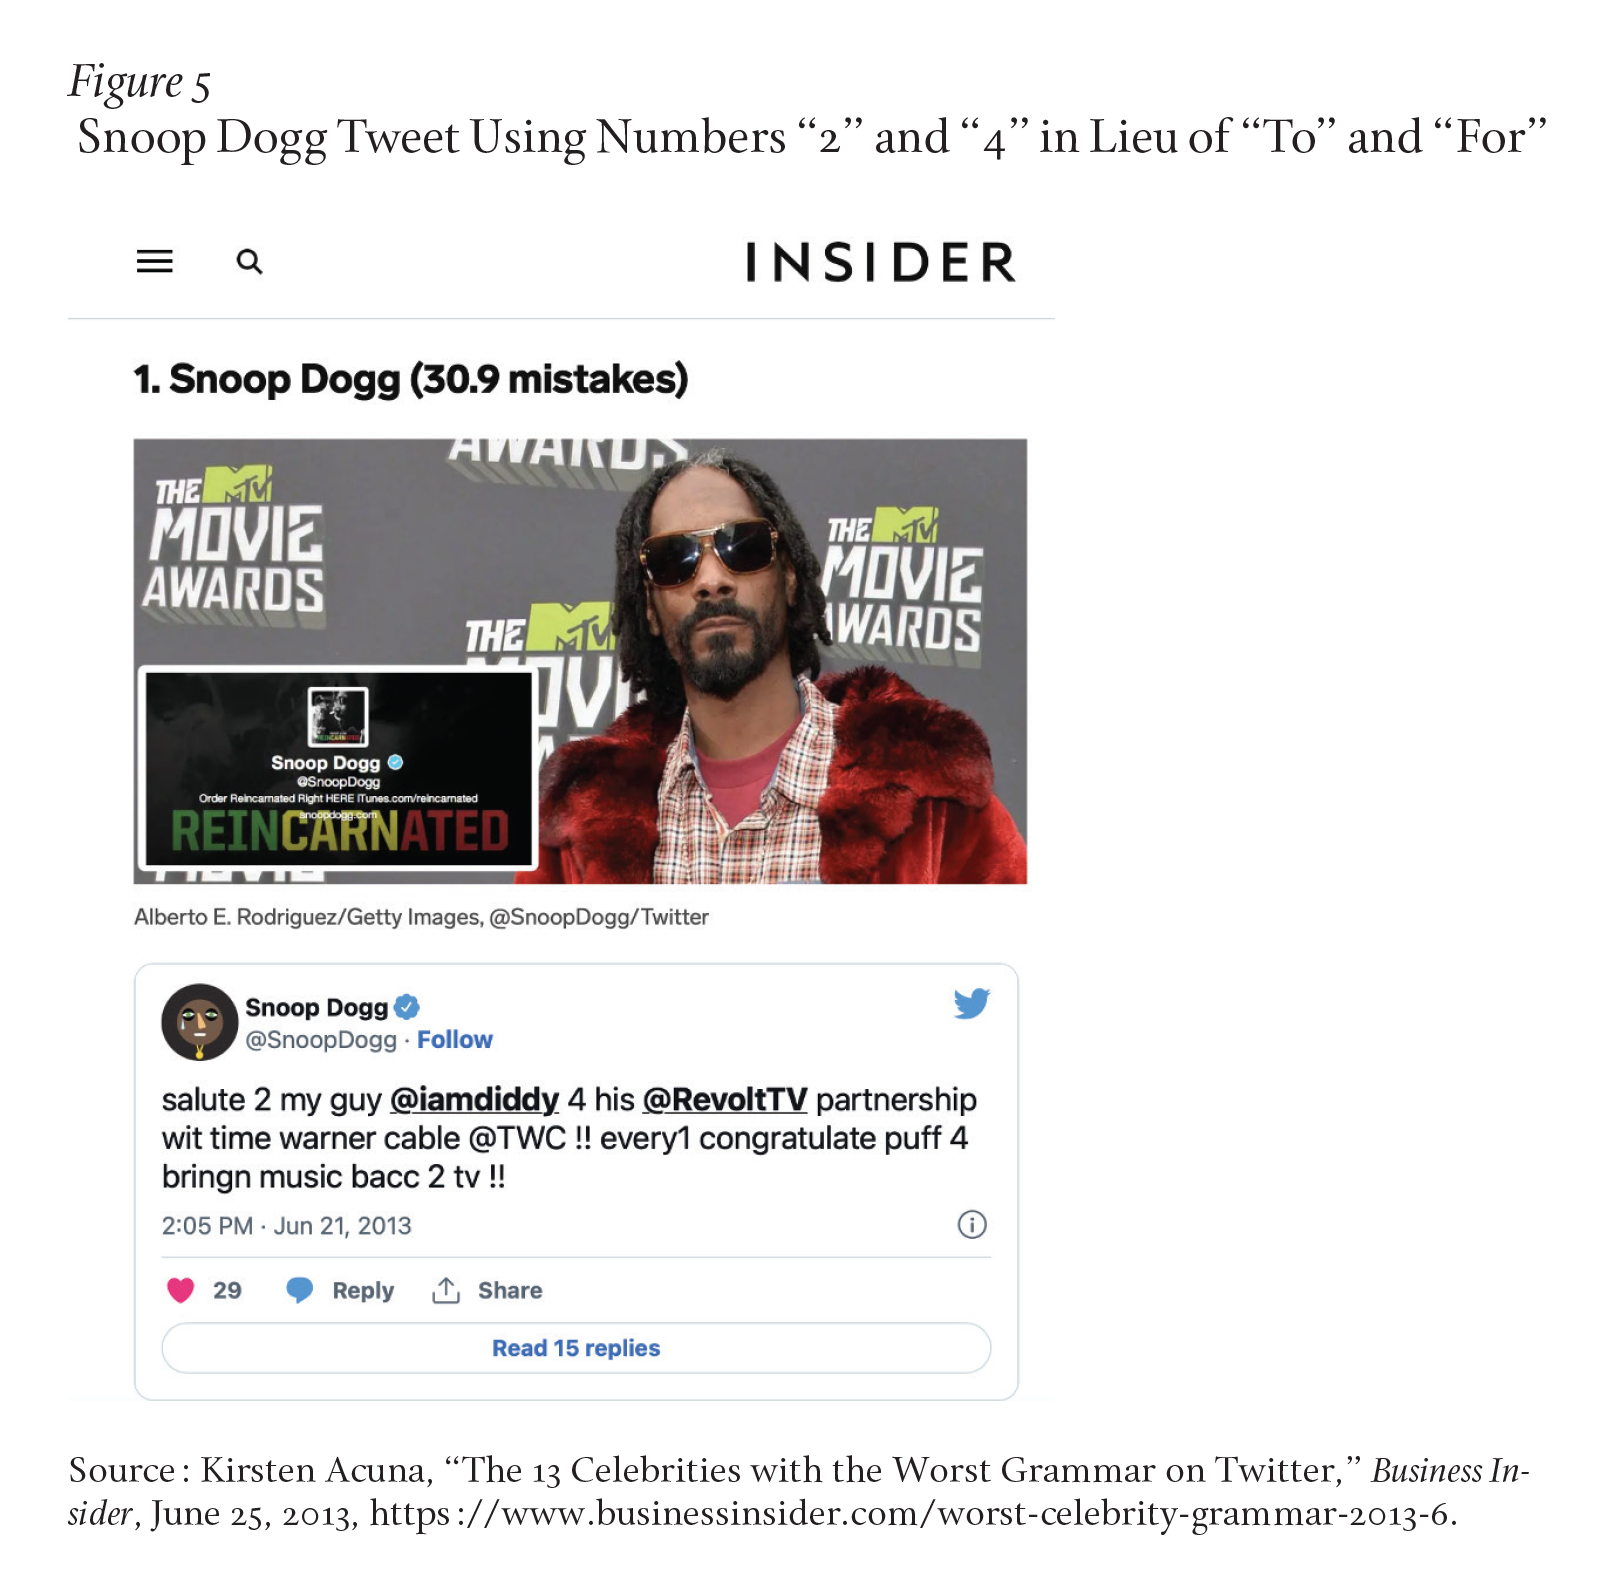 A screenshot of a tweet published as part of an article on Business Insider, claiming Snoop Dogg made 30.9 mistakes on twitter, and showing a Tweet where he used Numbers “2” and “4” in place of the words “to” and “for.”